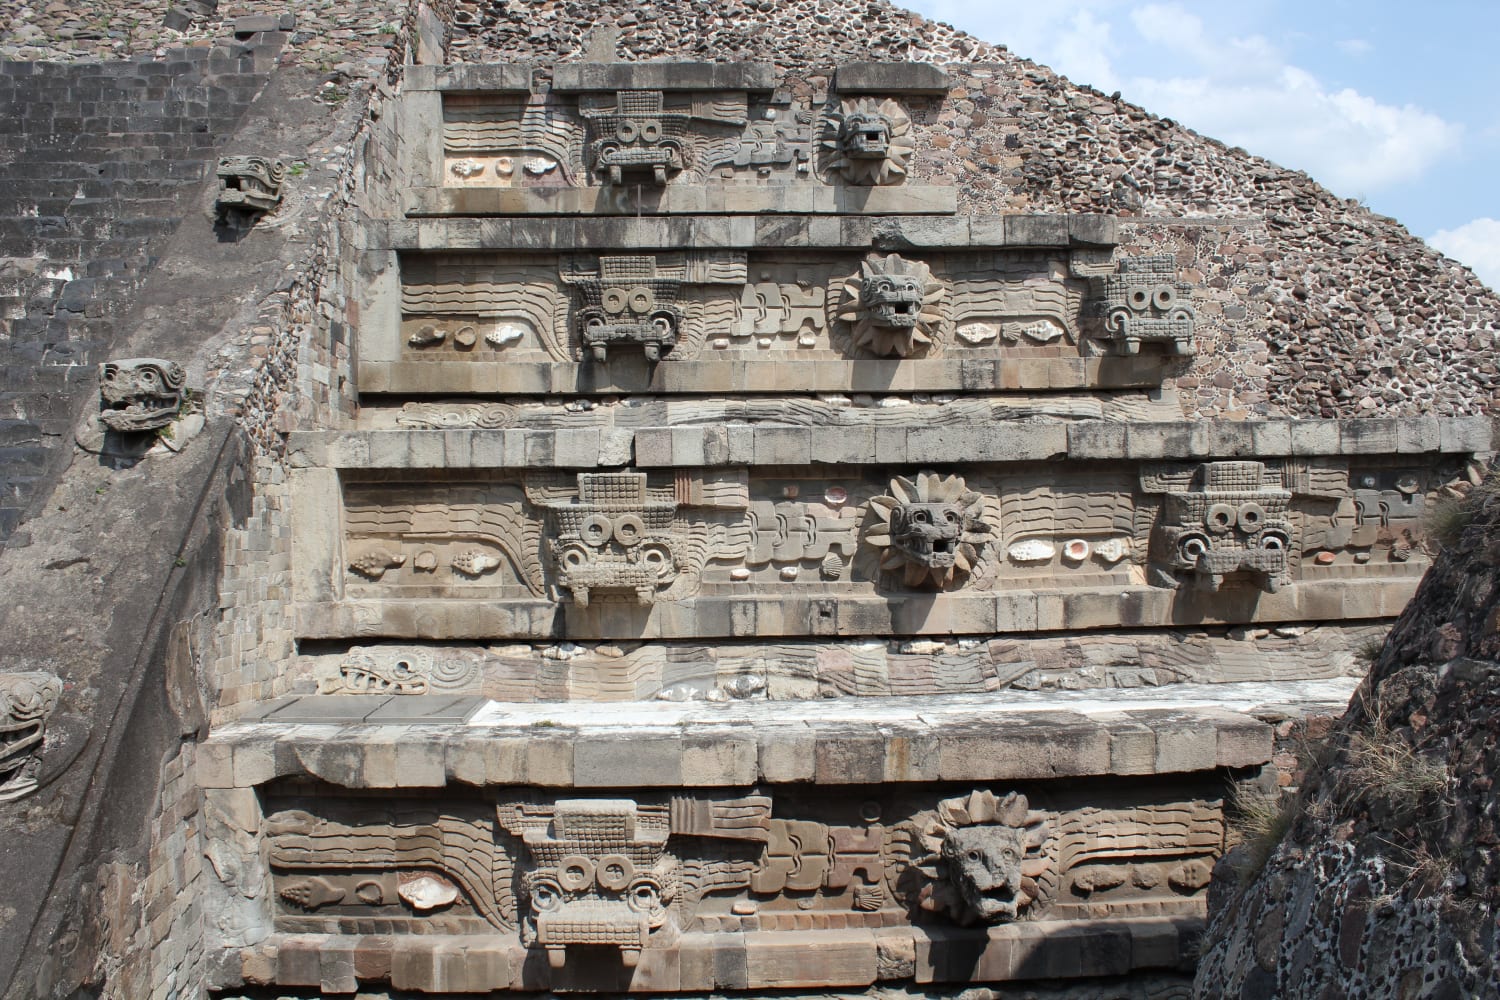 Carved details on the Temple of the Feathered Serpent at Teotihuacan depicting Quetzacoatl and another figure, possibly Tlaloc. Valley of Mexico, c. 150-200 CE